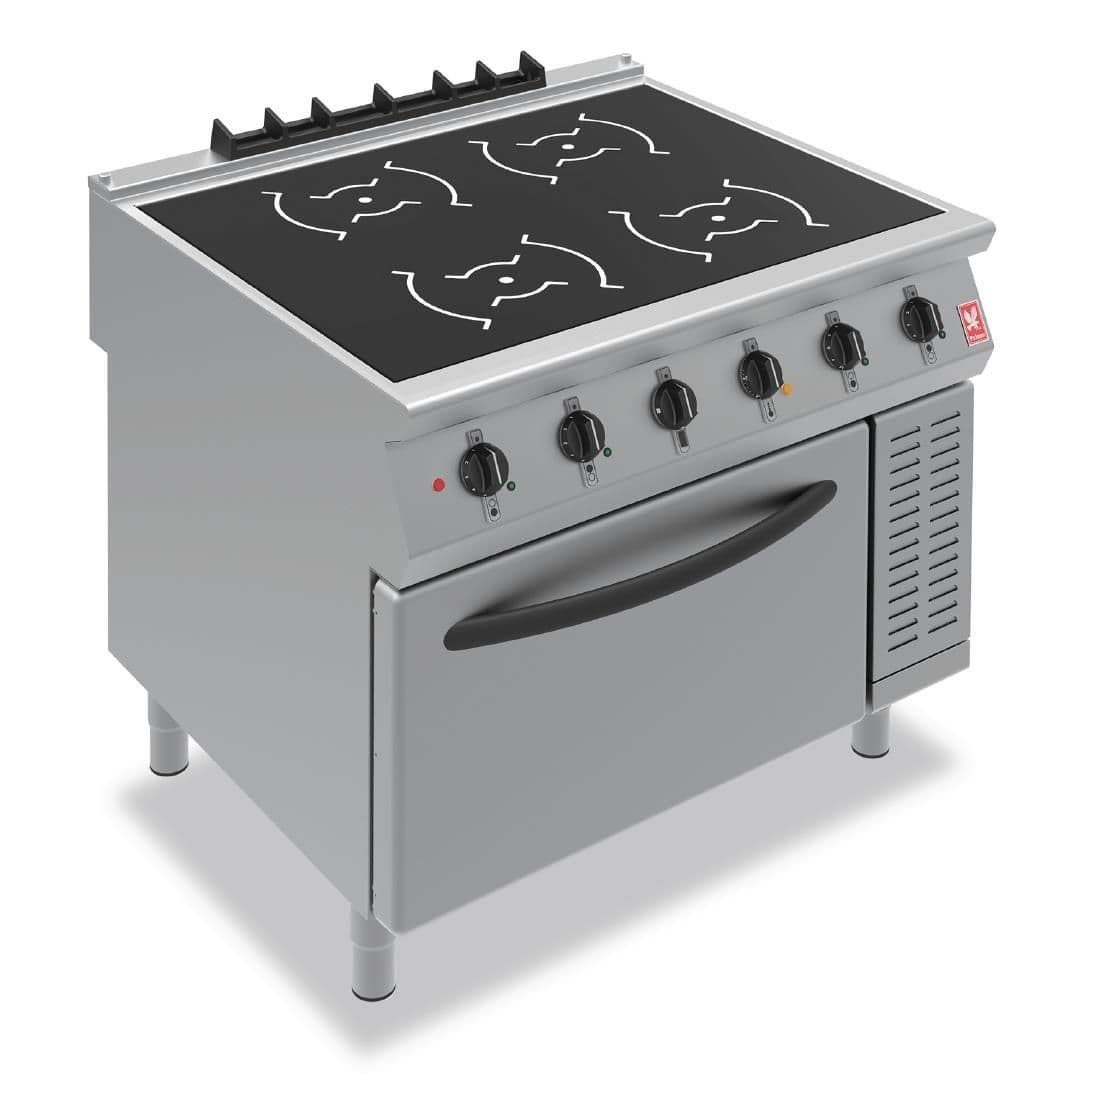 Falcon F900 Four Heat Zone Induction Range i91105 JD Catering Equipment Solutions Ltd